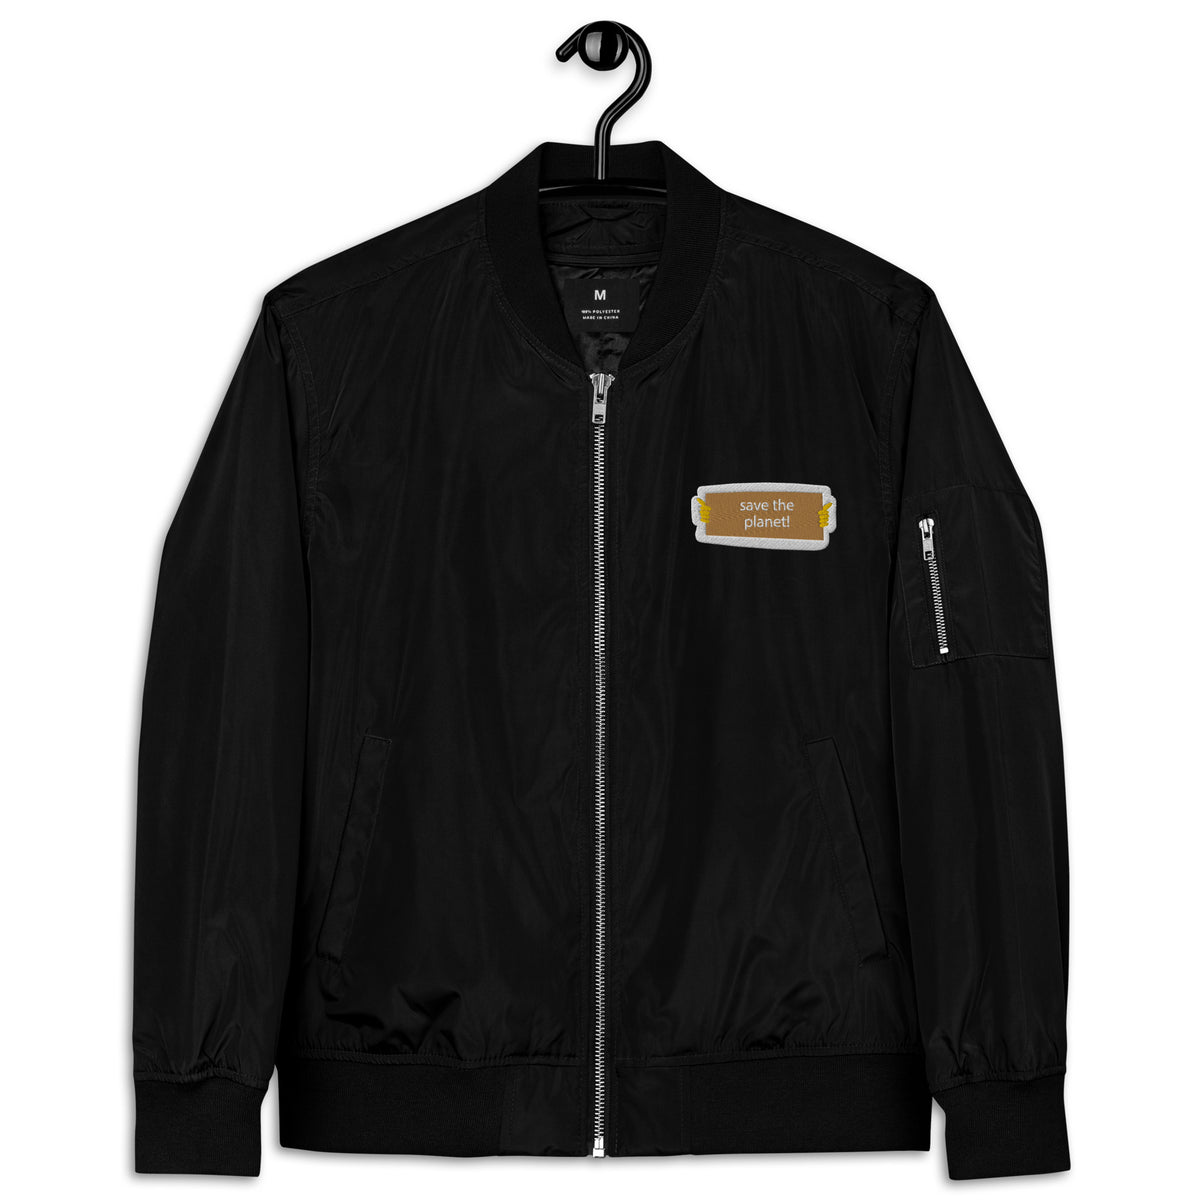 Save The Planet Premium Recycled Bomber Jacket